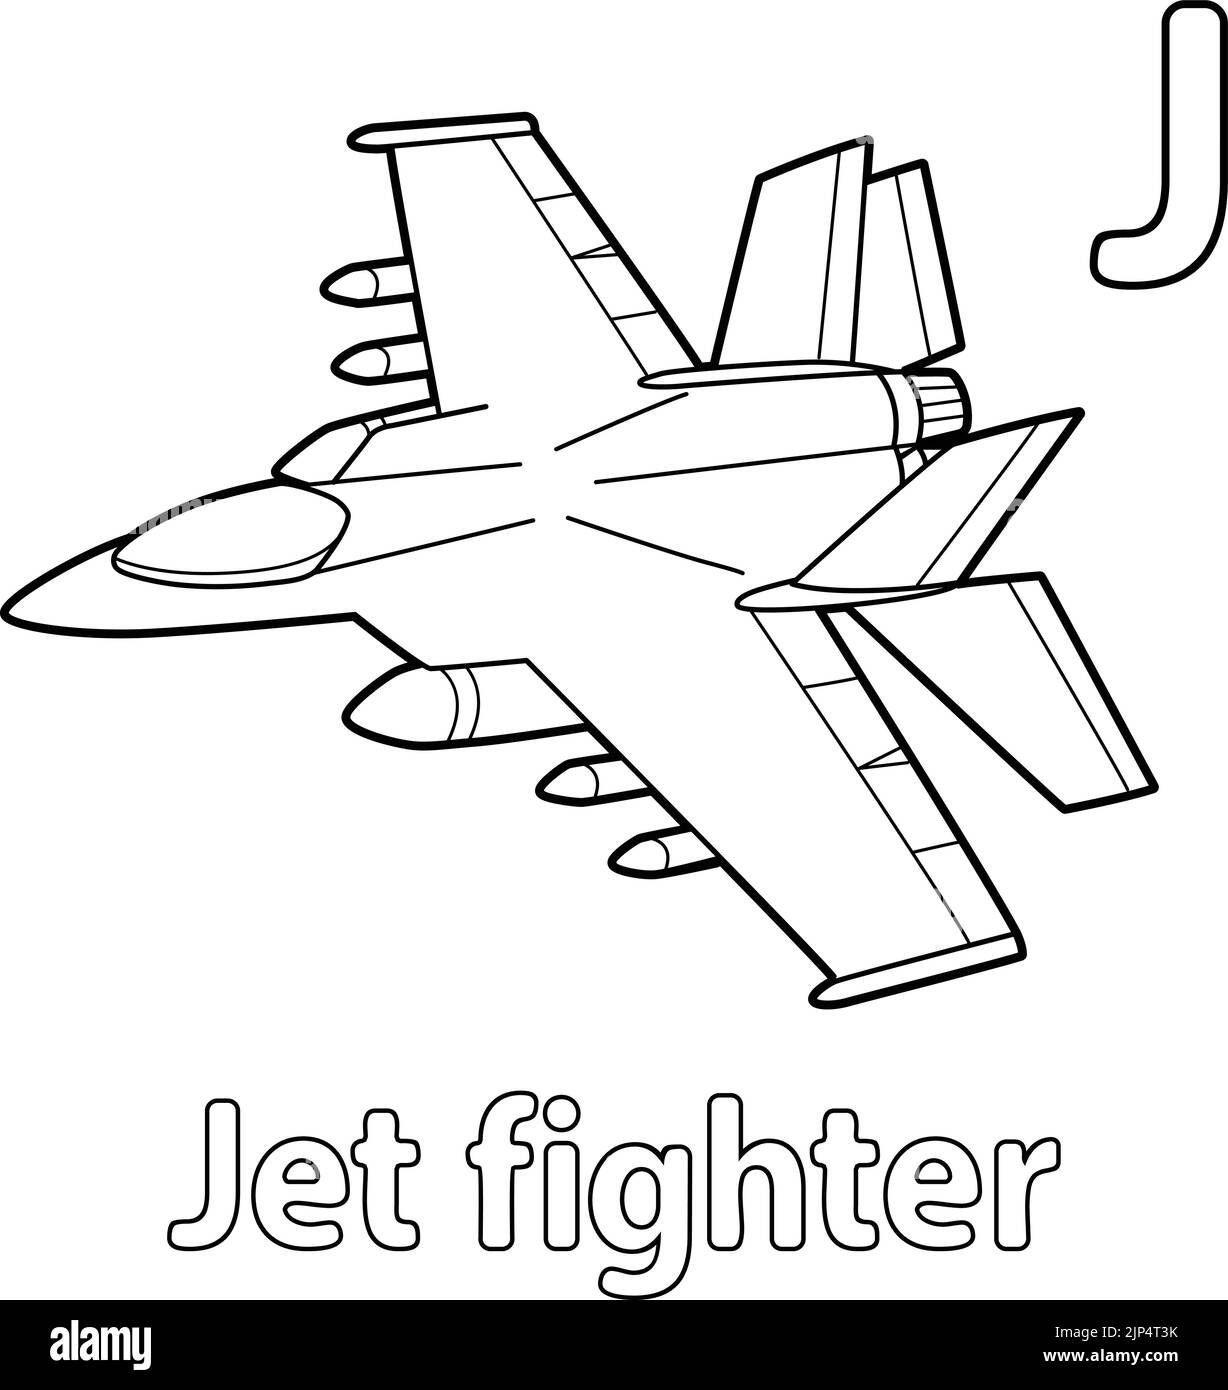 Jet Fighter Alphabet ABC Coloring Page J Stock Vector